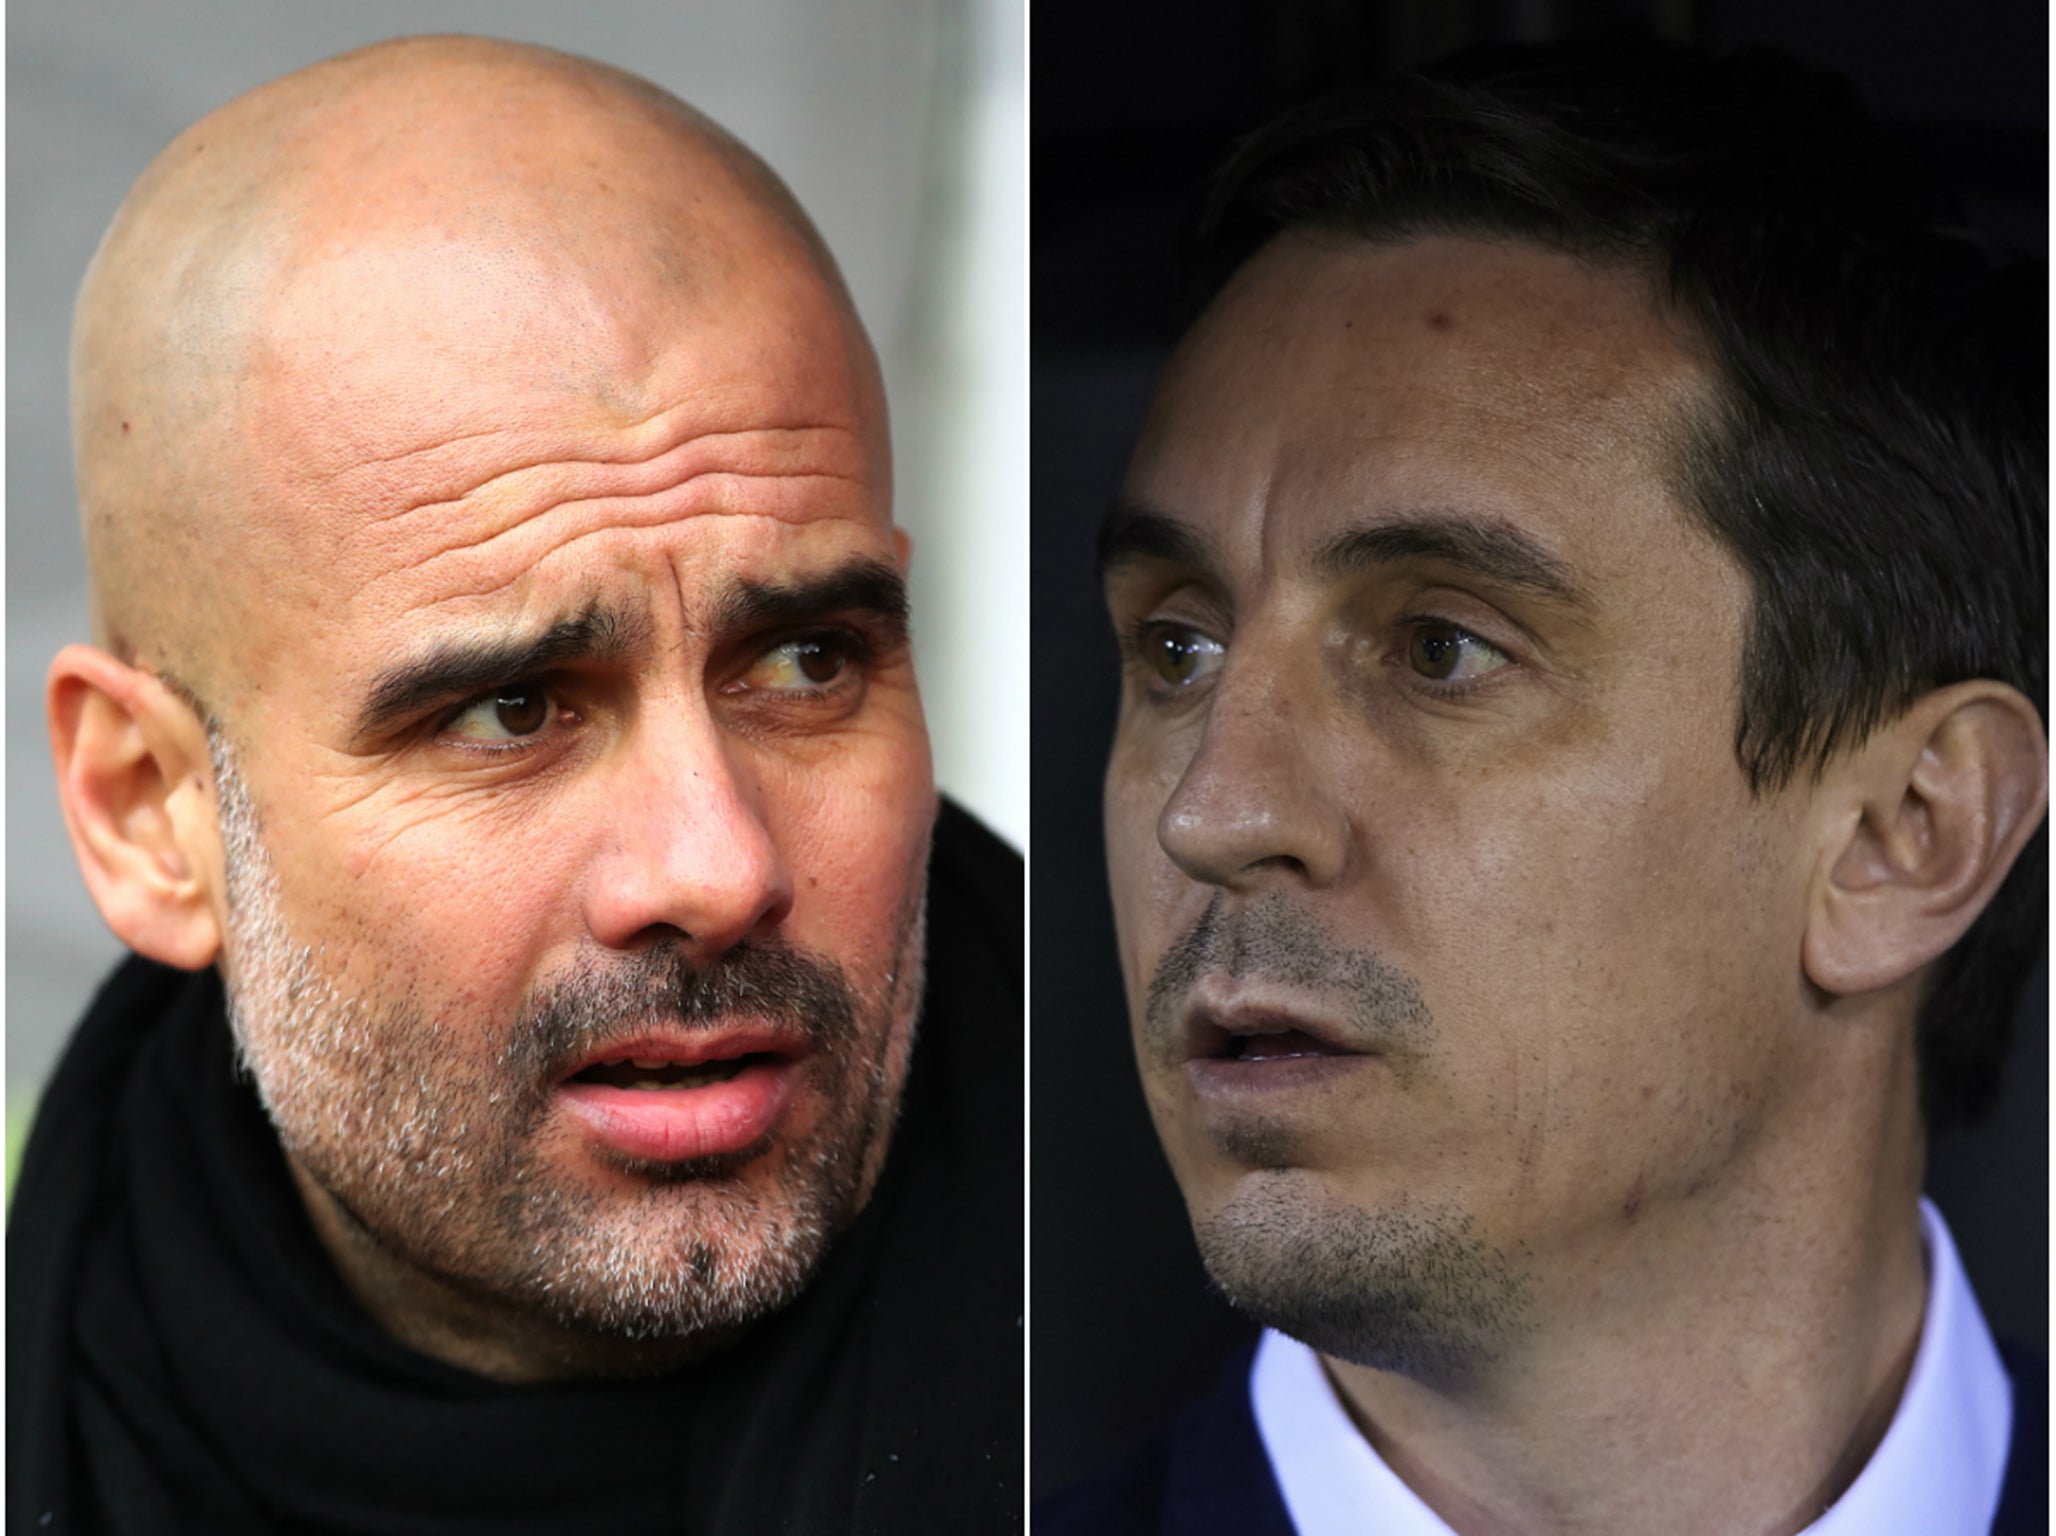 Guardiola has hit back at Neville